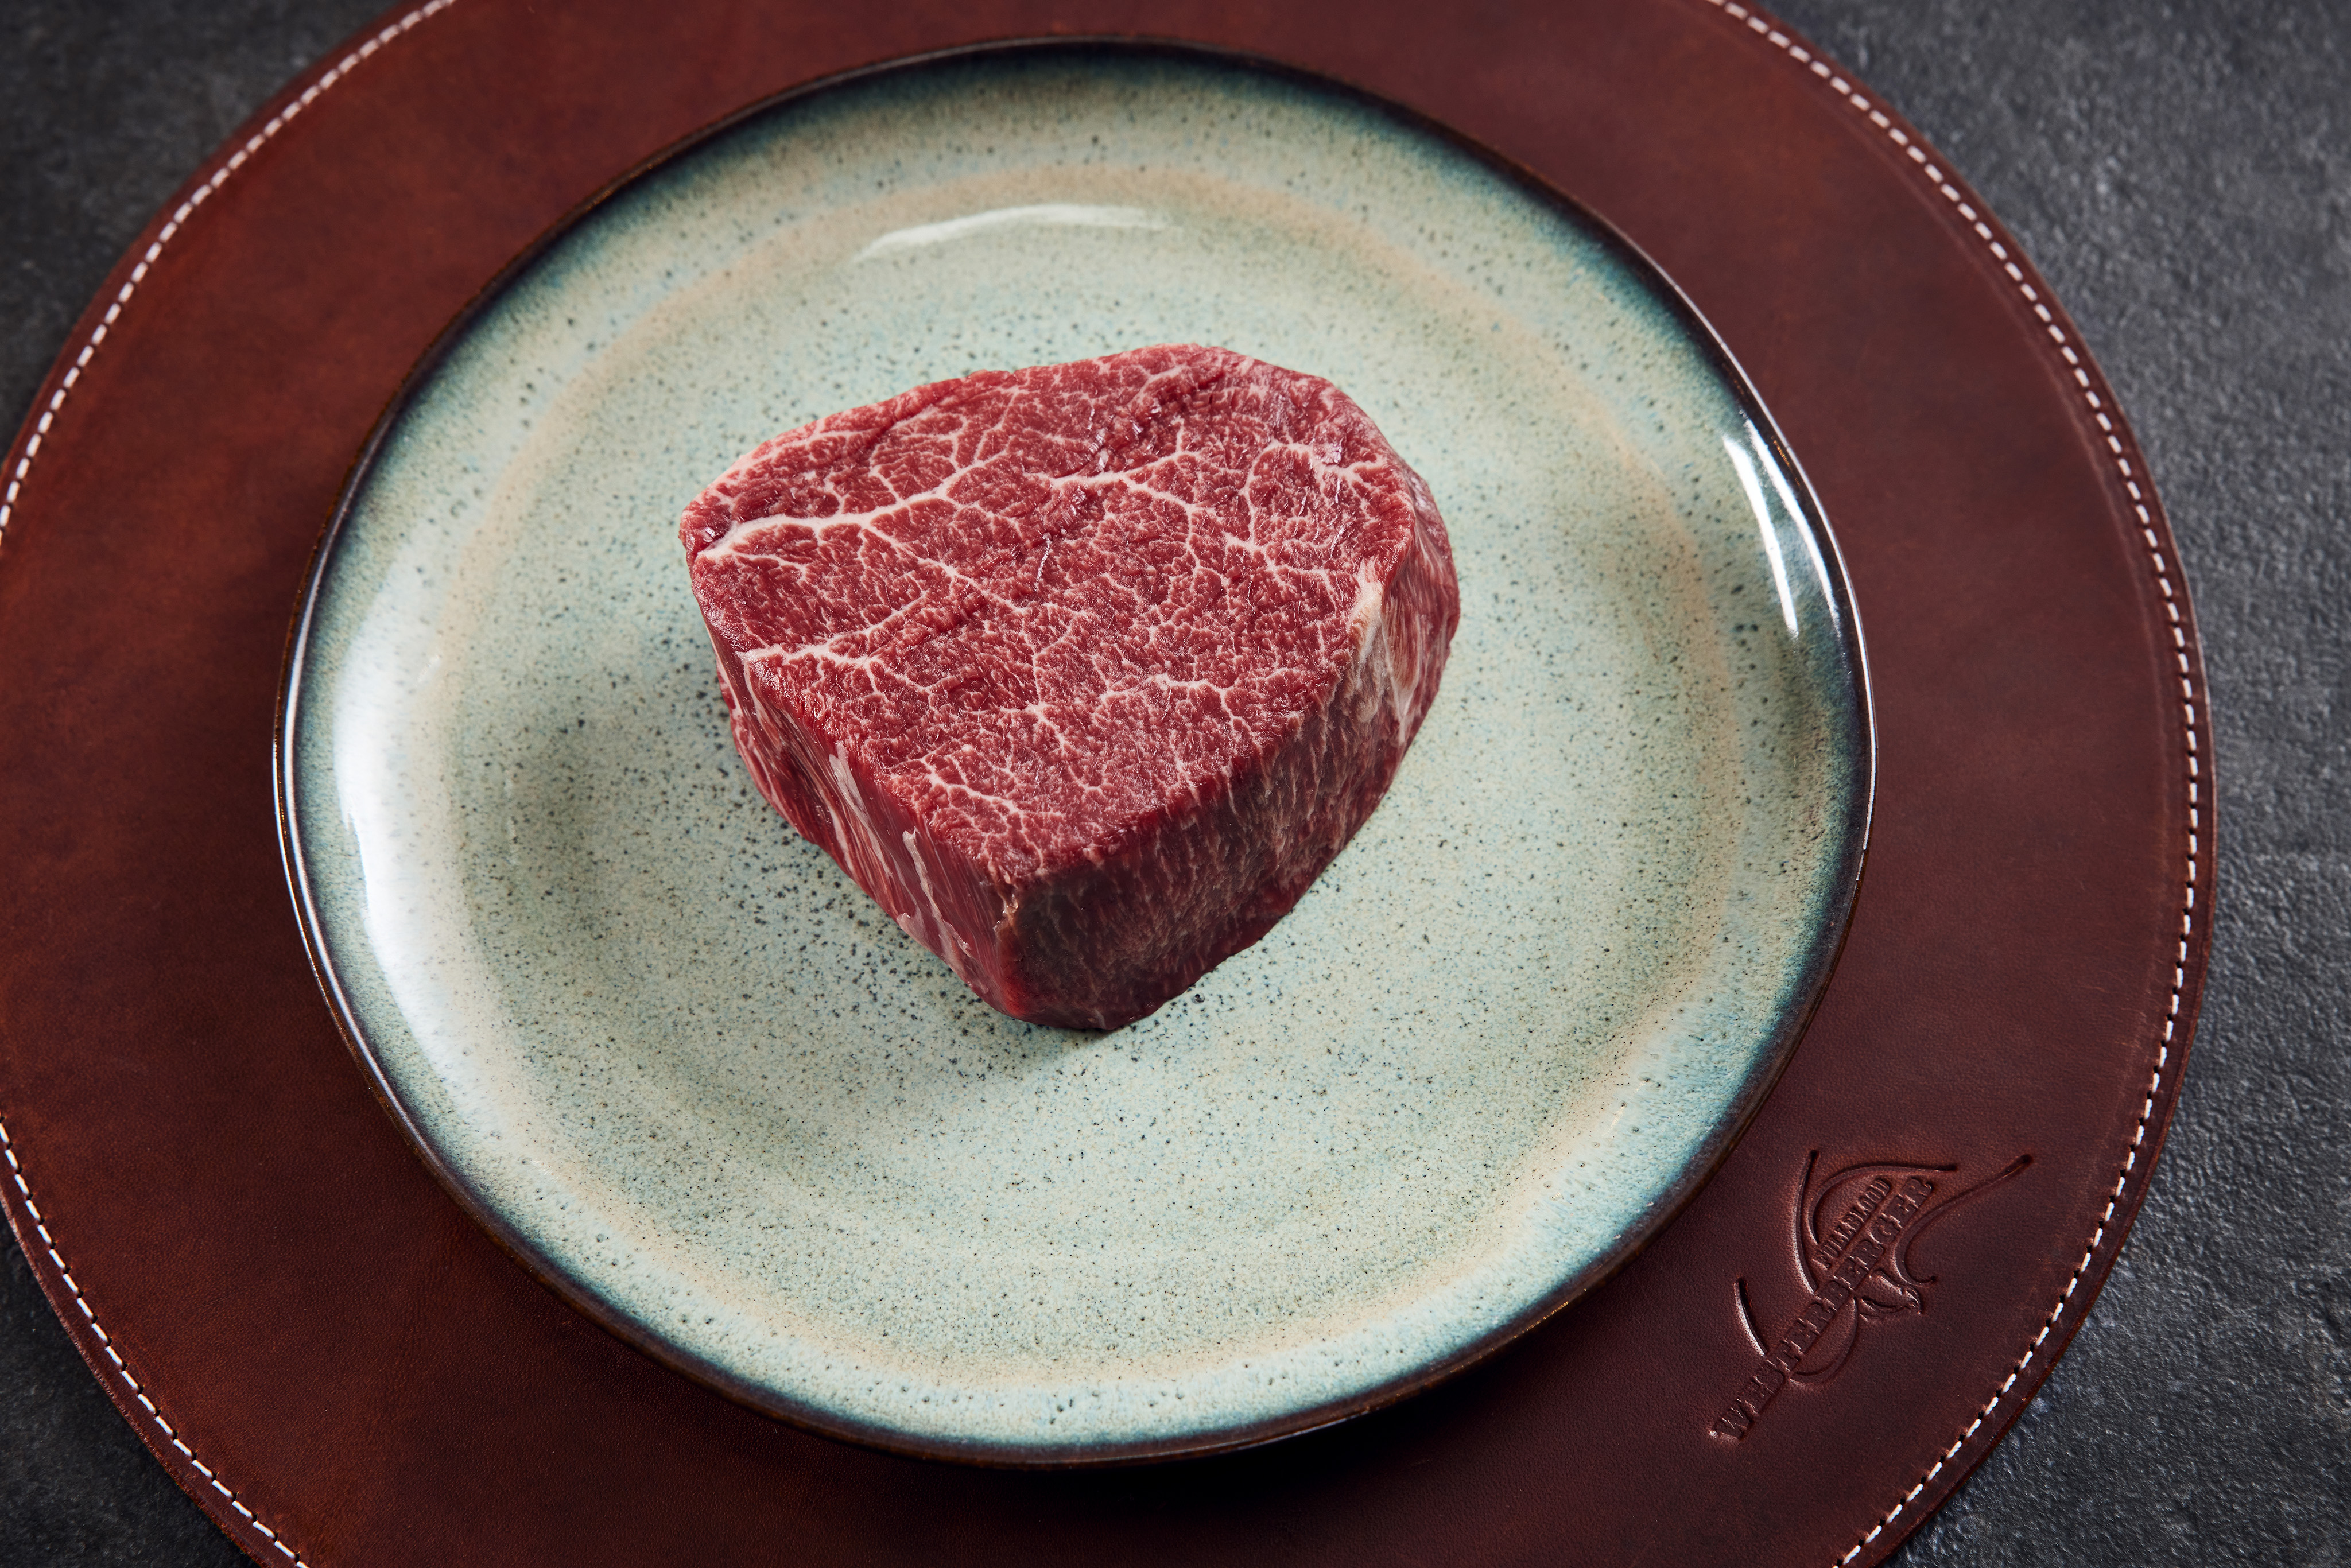 WFB Wagyu Filet Medaillons "Alte Kuh"